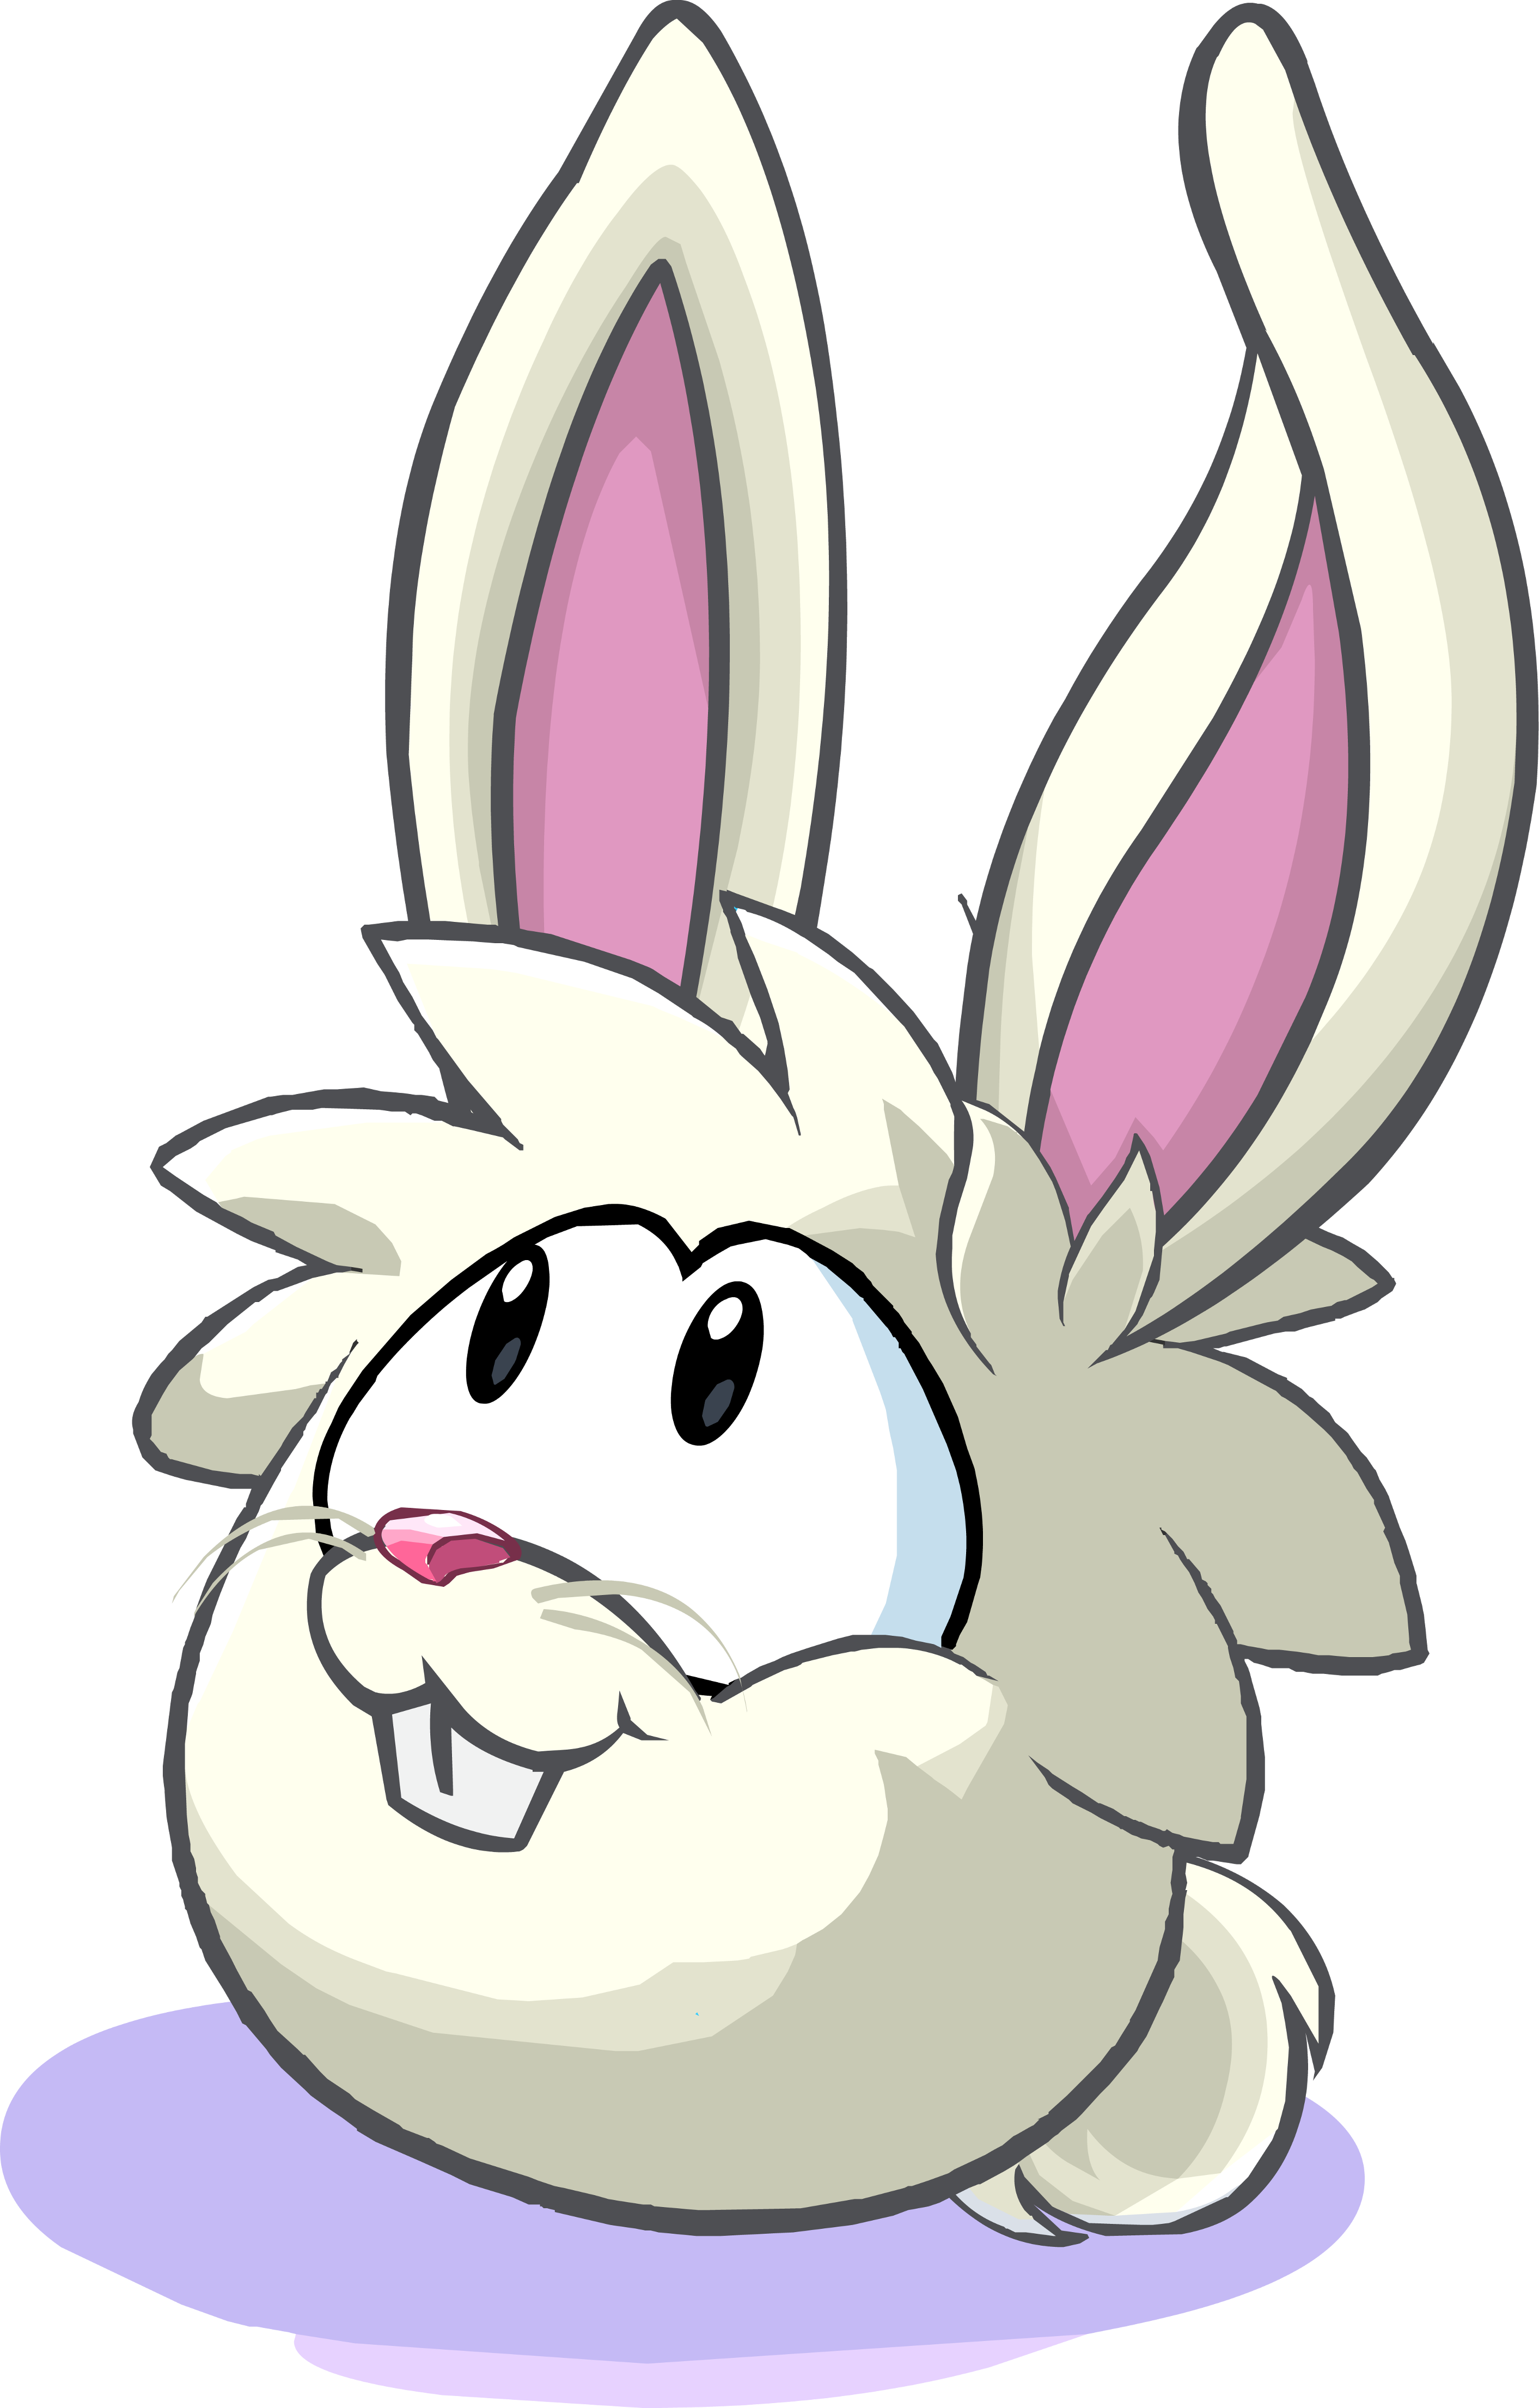 Download Cry clipart rabbit, Cry rabbit Transparent FREE for ...